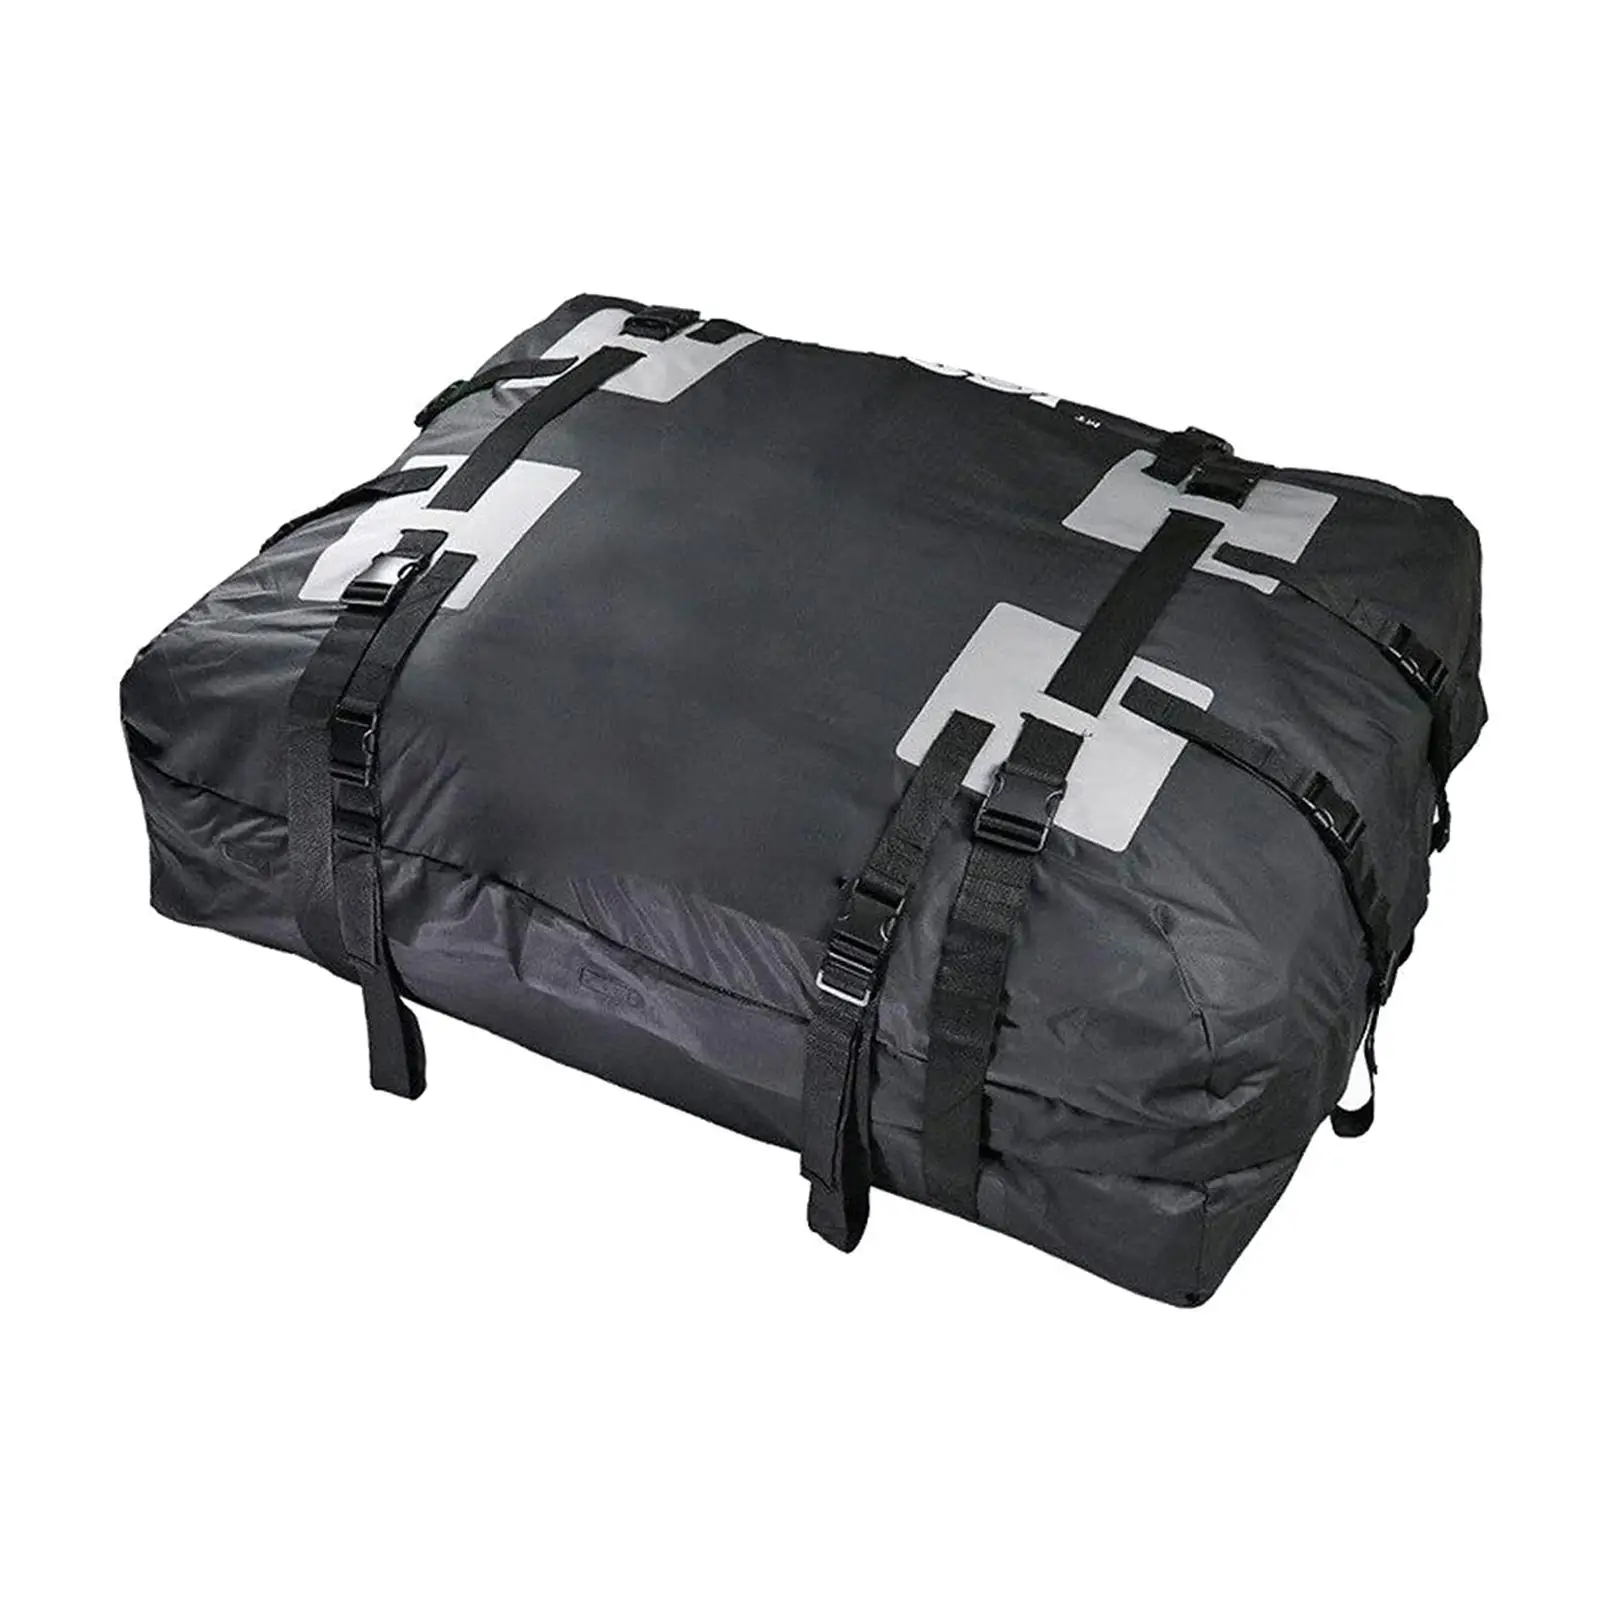 15 Cubic Feet Car Rooftop Bag, Car Roof Luggage Bag, Luggage Storage Waterproof Rooftop Carrier Bag, for Vehicles Cars SUV